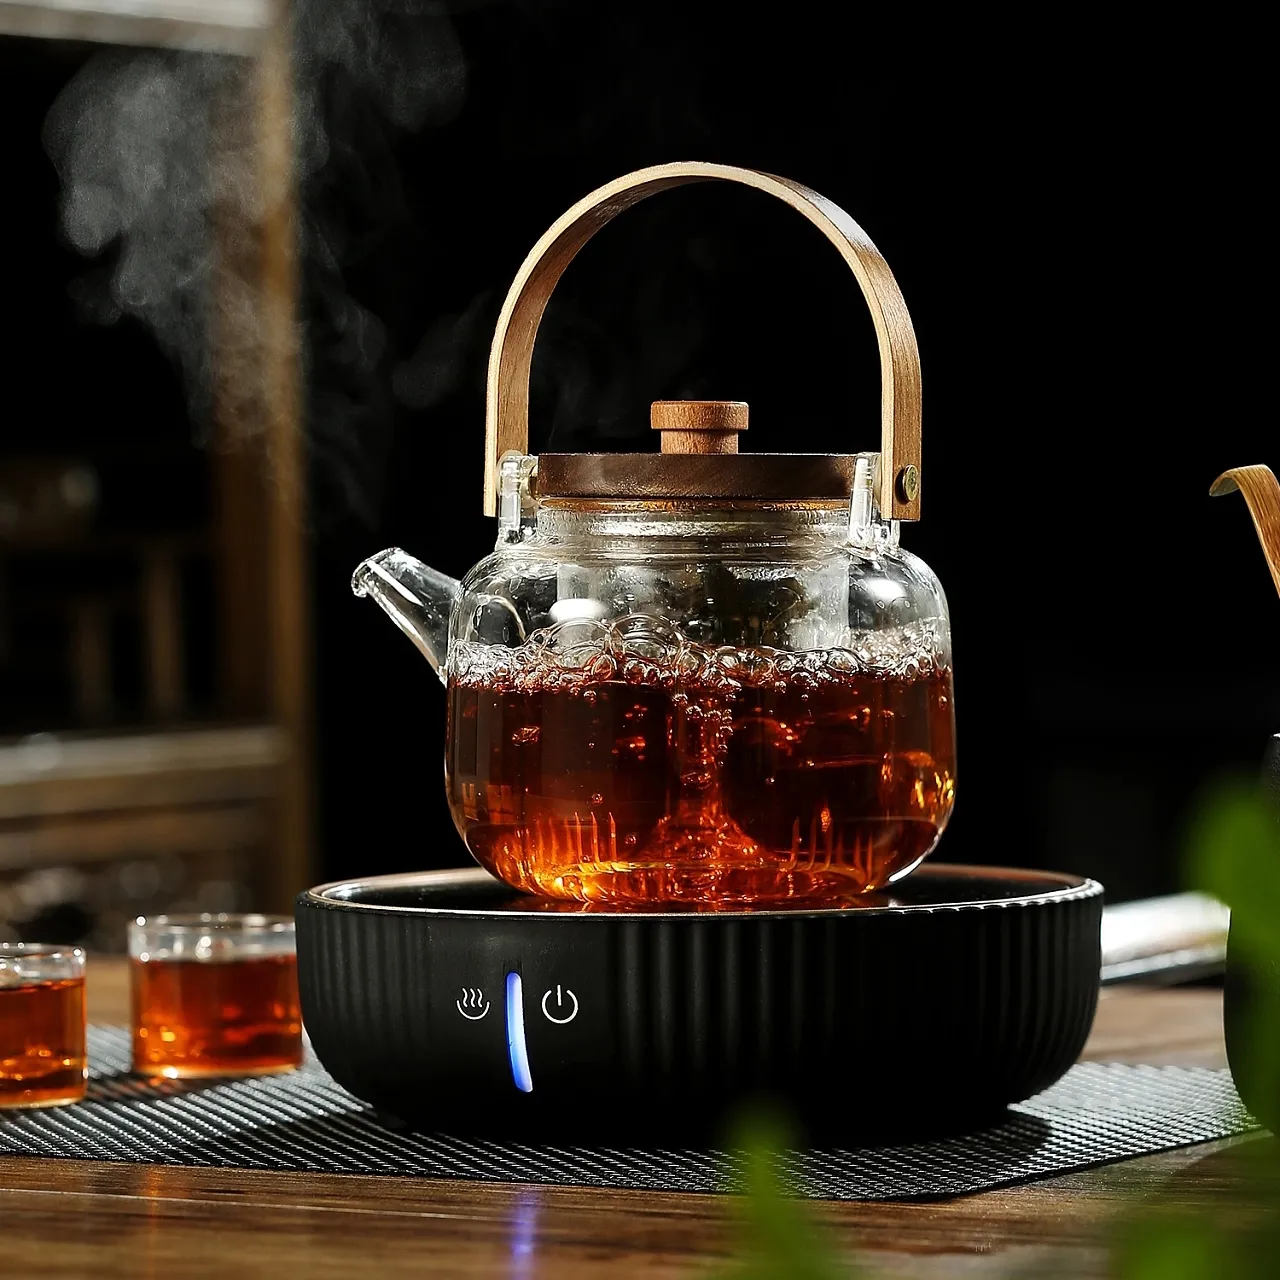 Product photography, electric kettle shooting gue, Gallery posted by 刘流